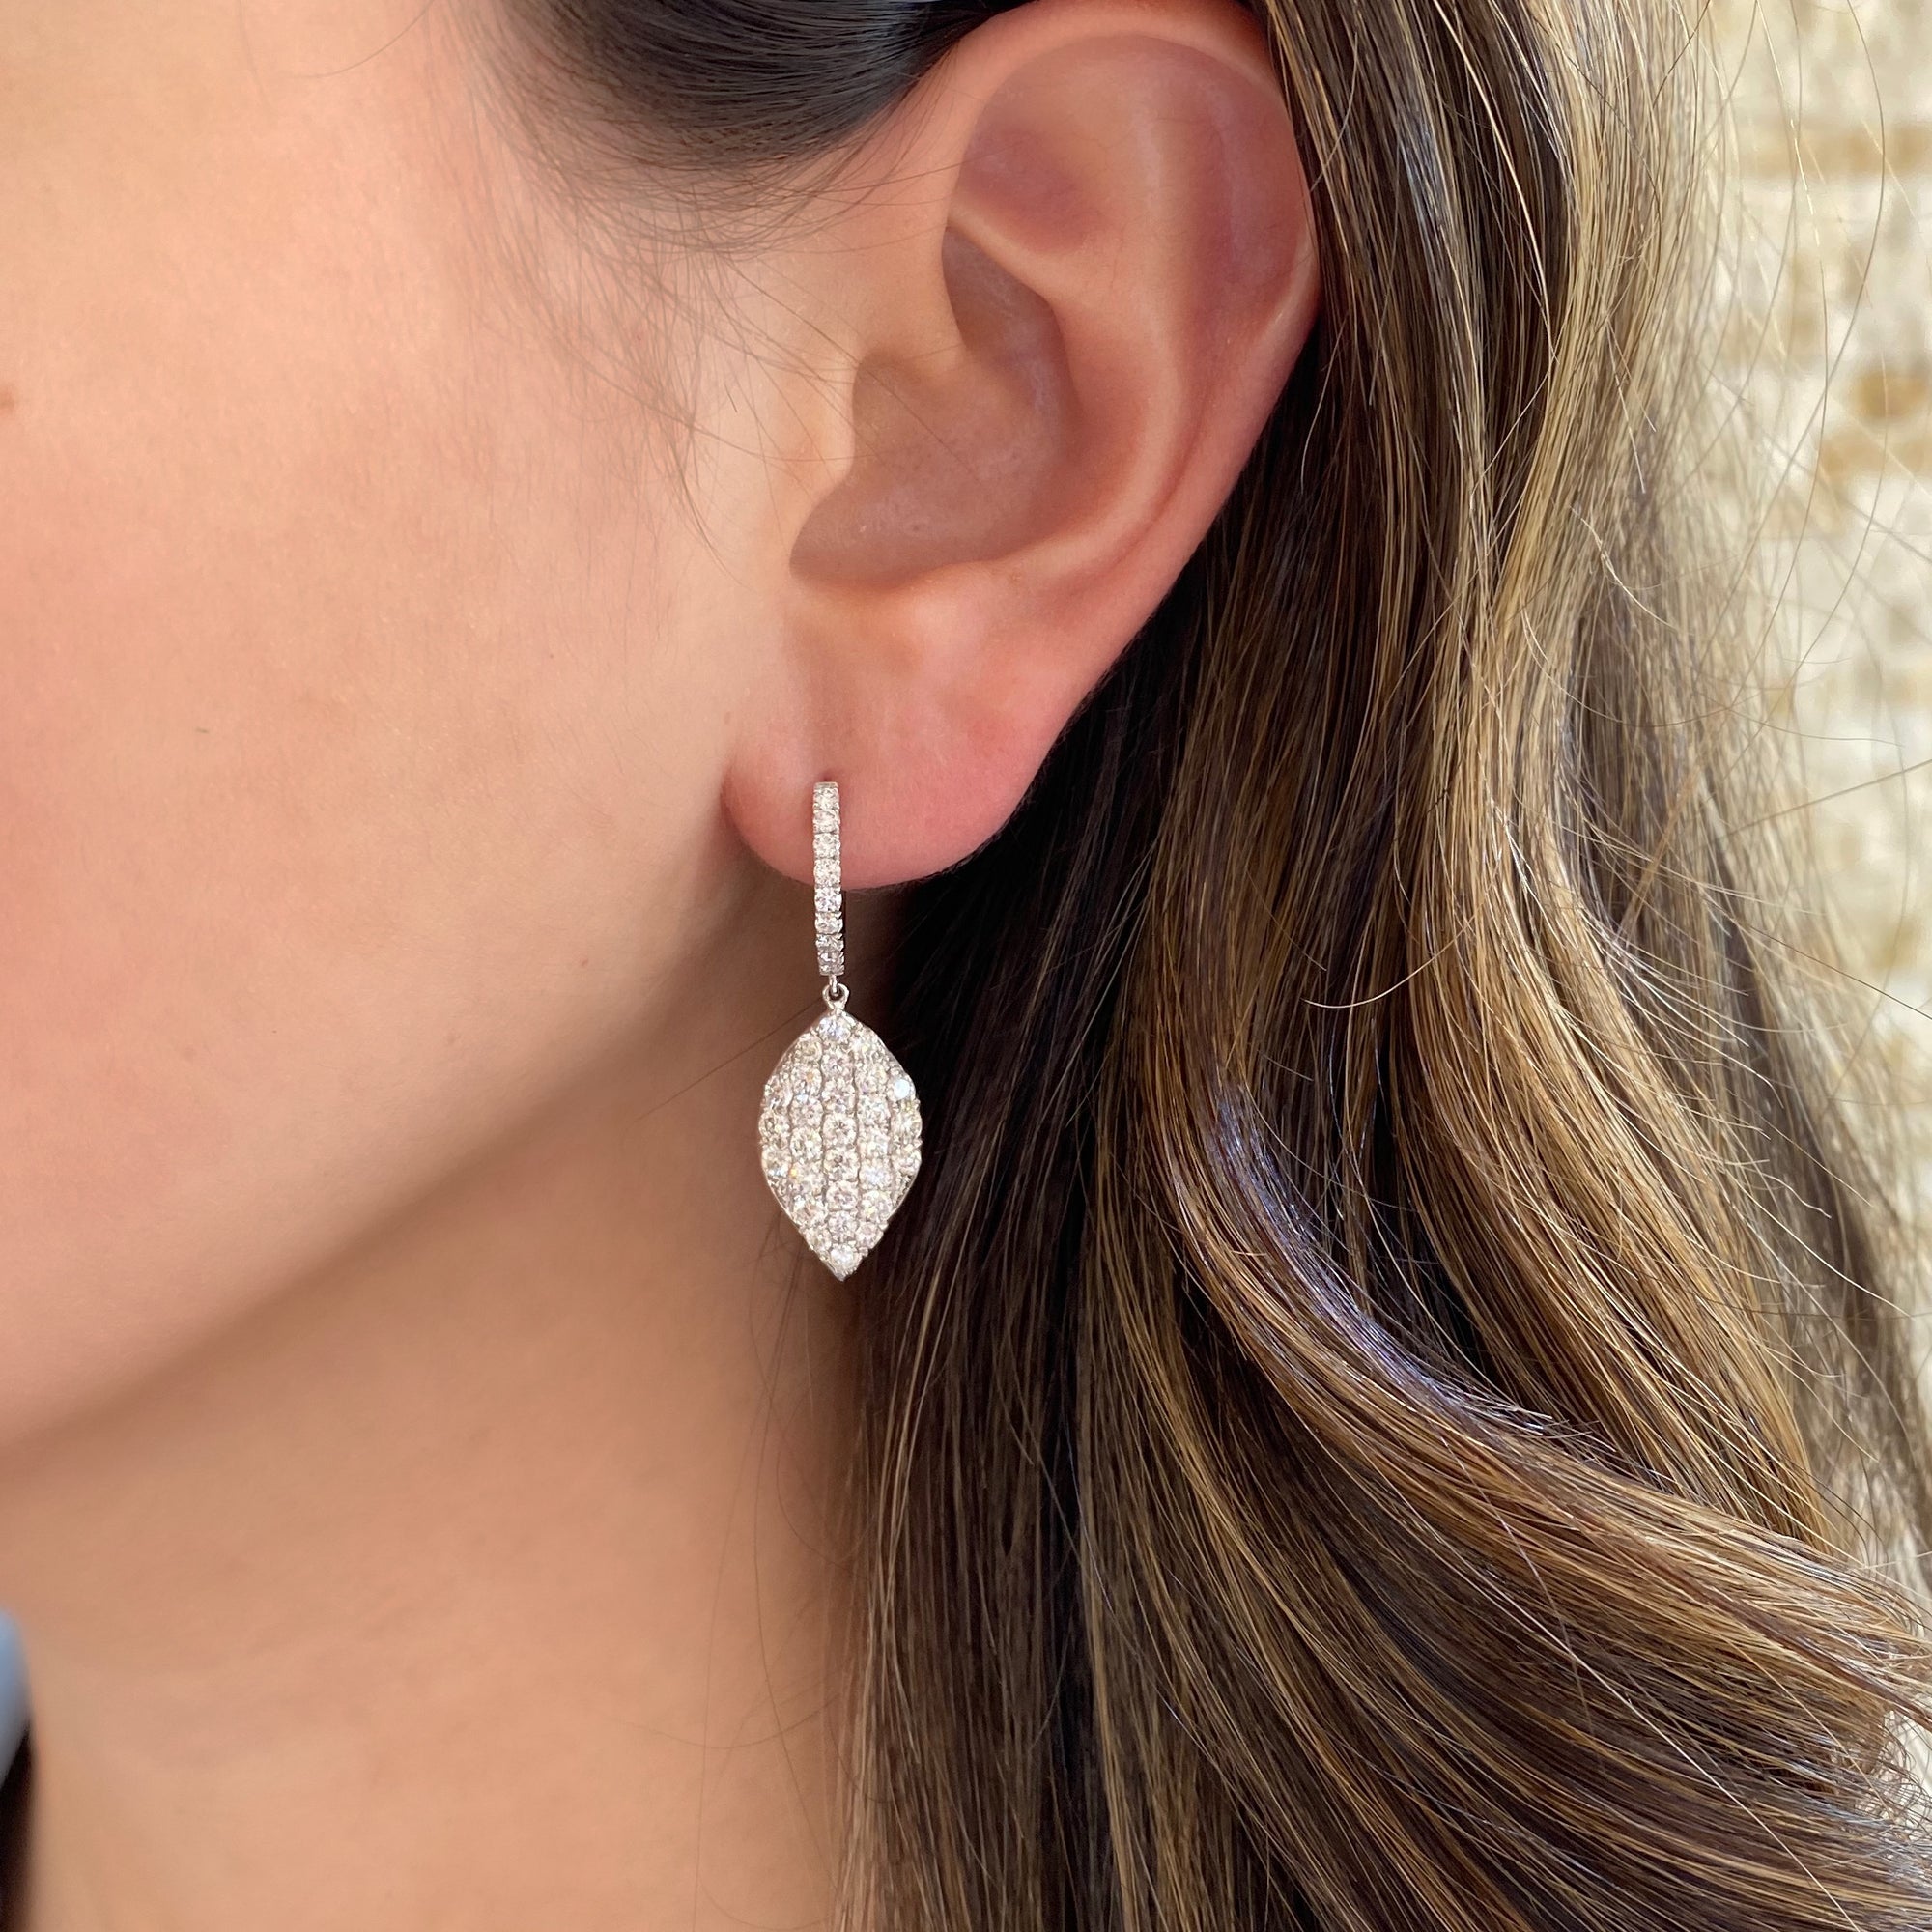 Diamond Simple Dangle Earrings -18K white gold weighing 5.27 grams -74 round diamonds totaling 2.75 carats